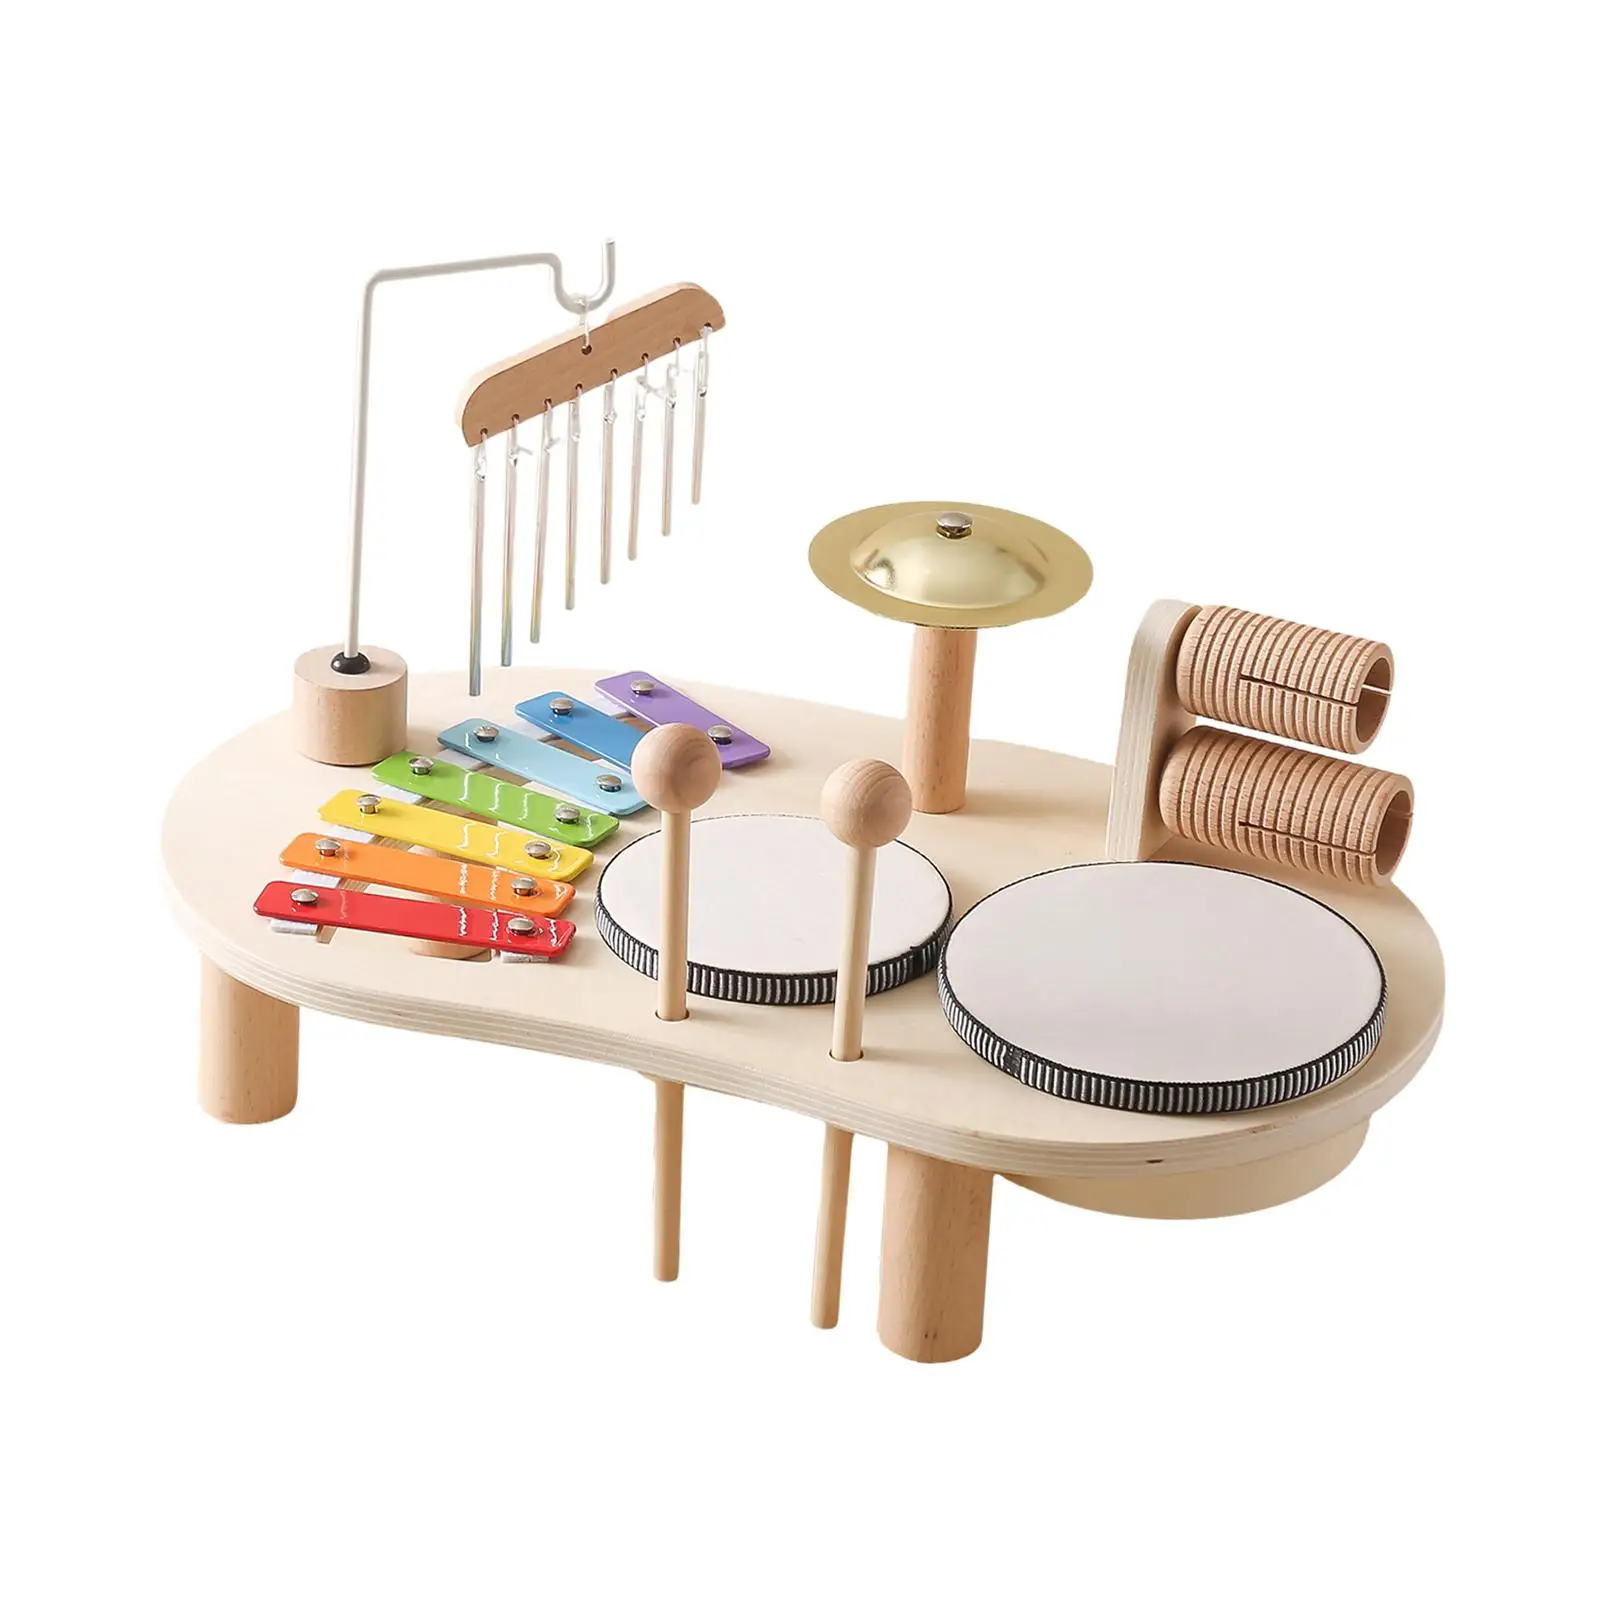 Xylophone Drum Set, Montessori Musical Instruments Set, Wooden Percussion